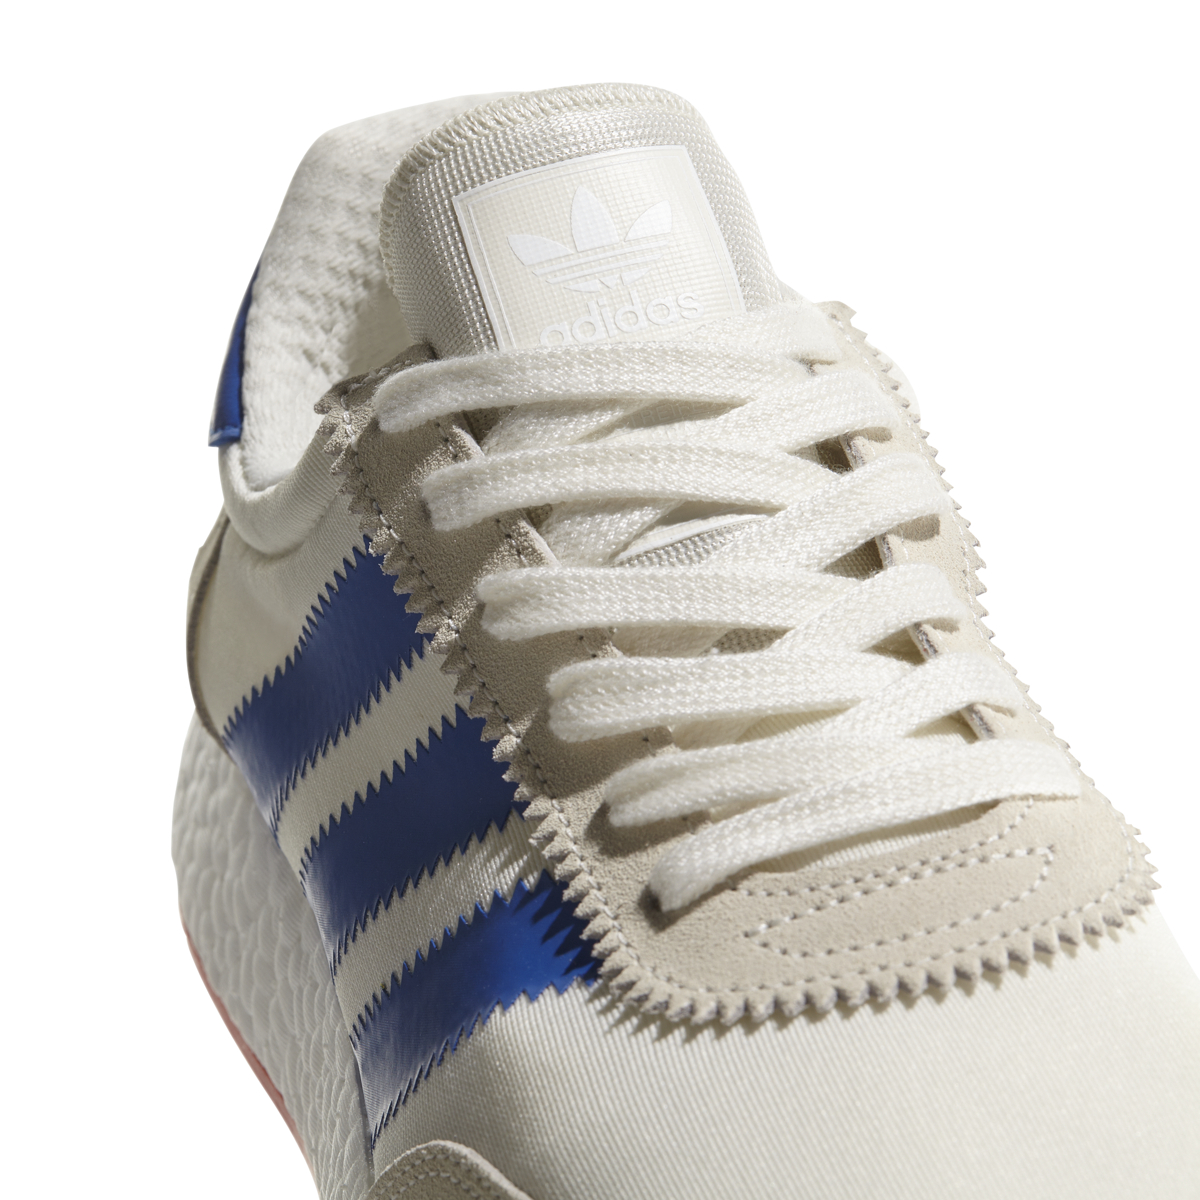 adidas i 5923 off white blue red